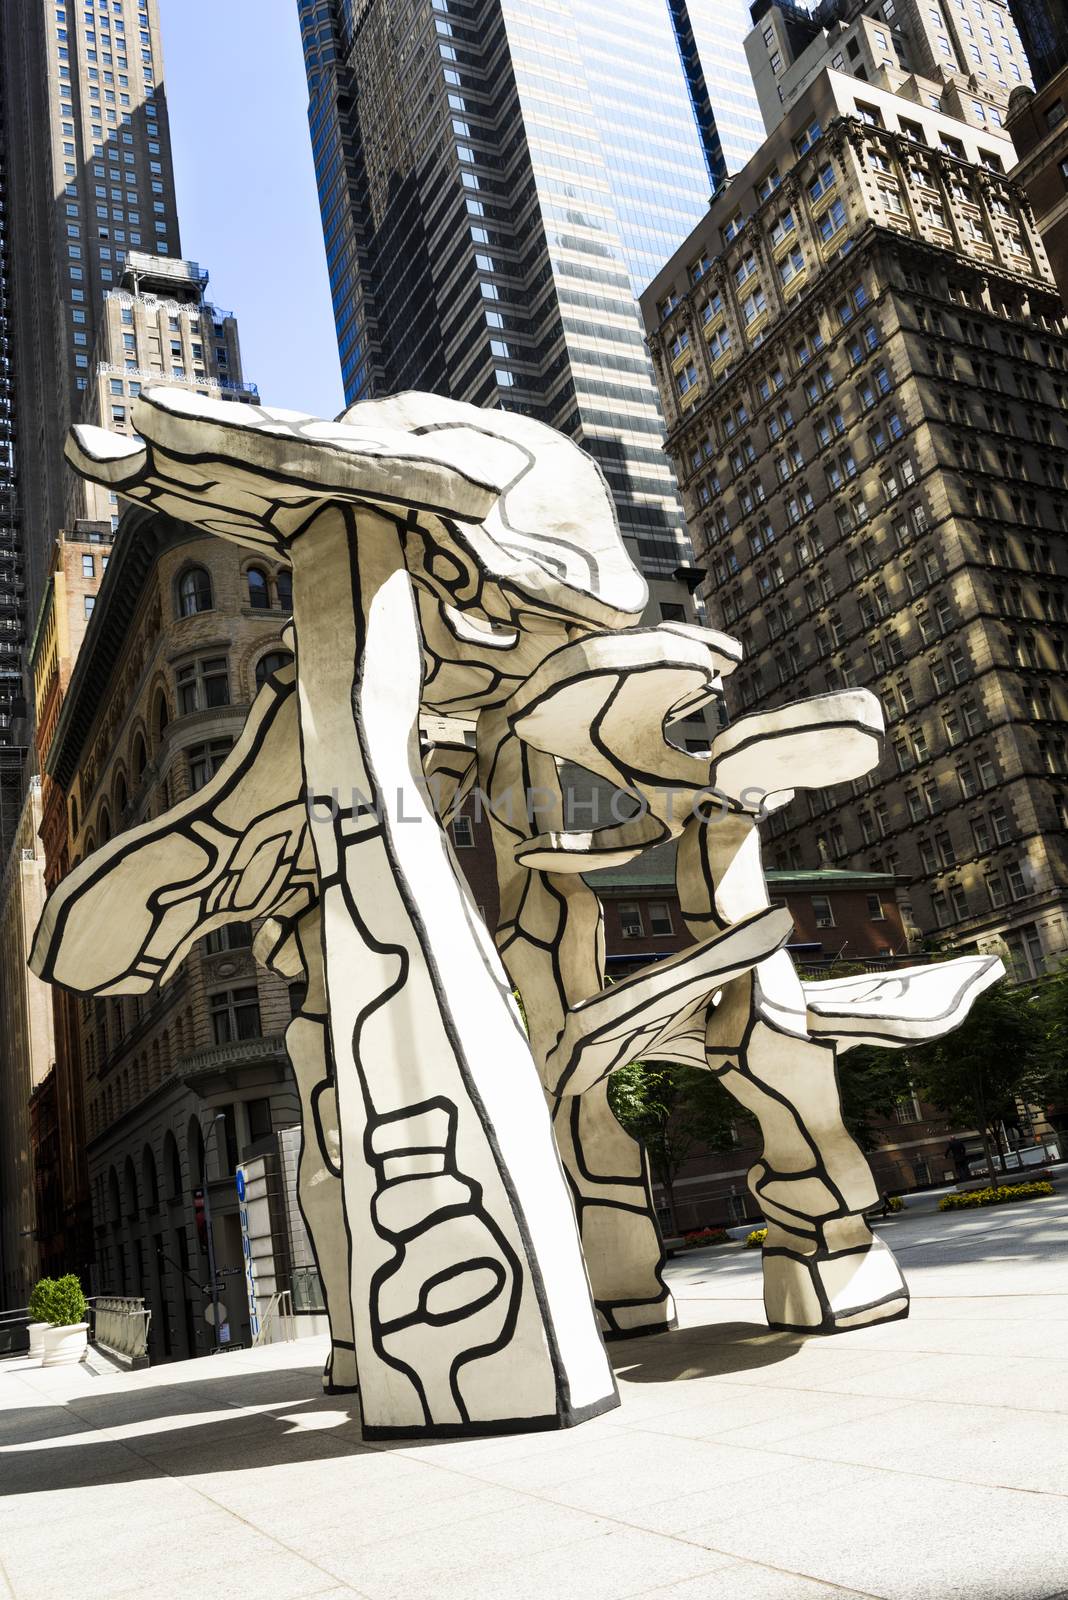 Dubuffet group of trees in New york city by ventdusud